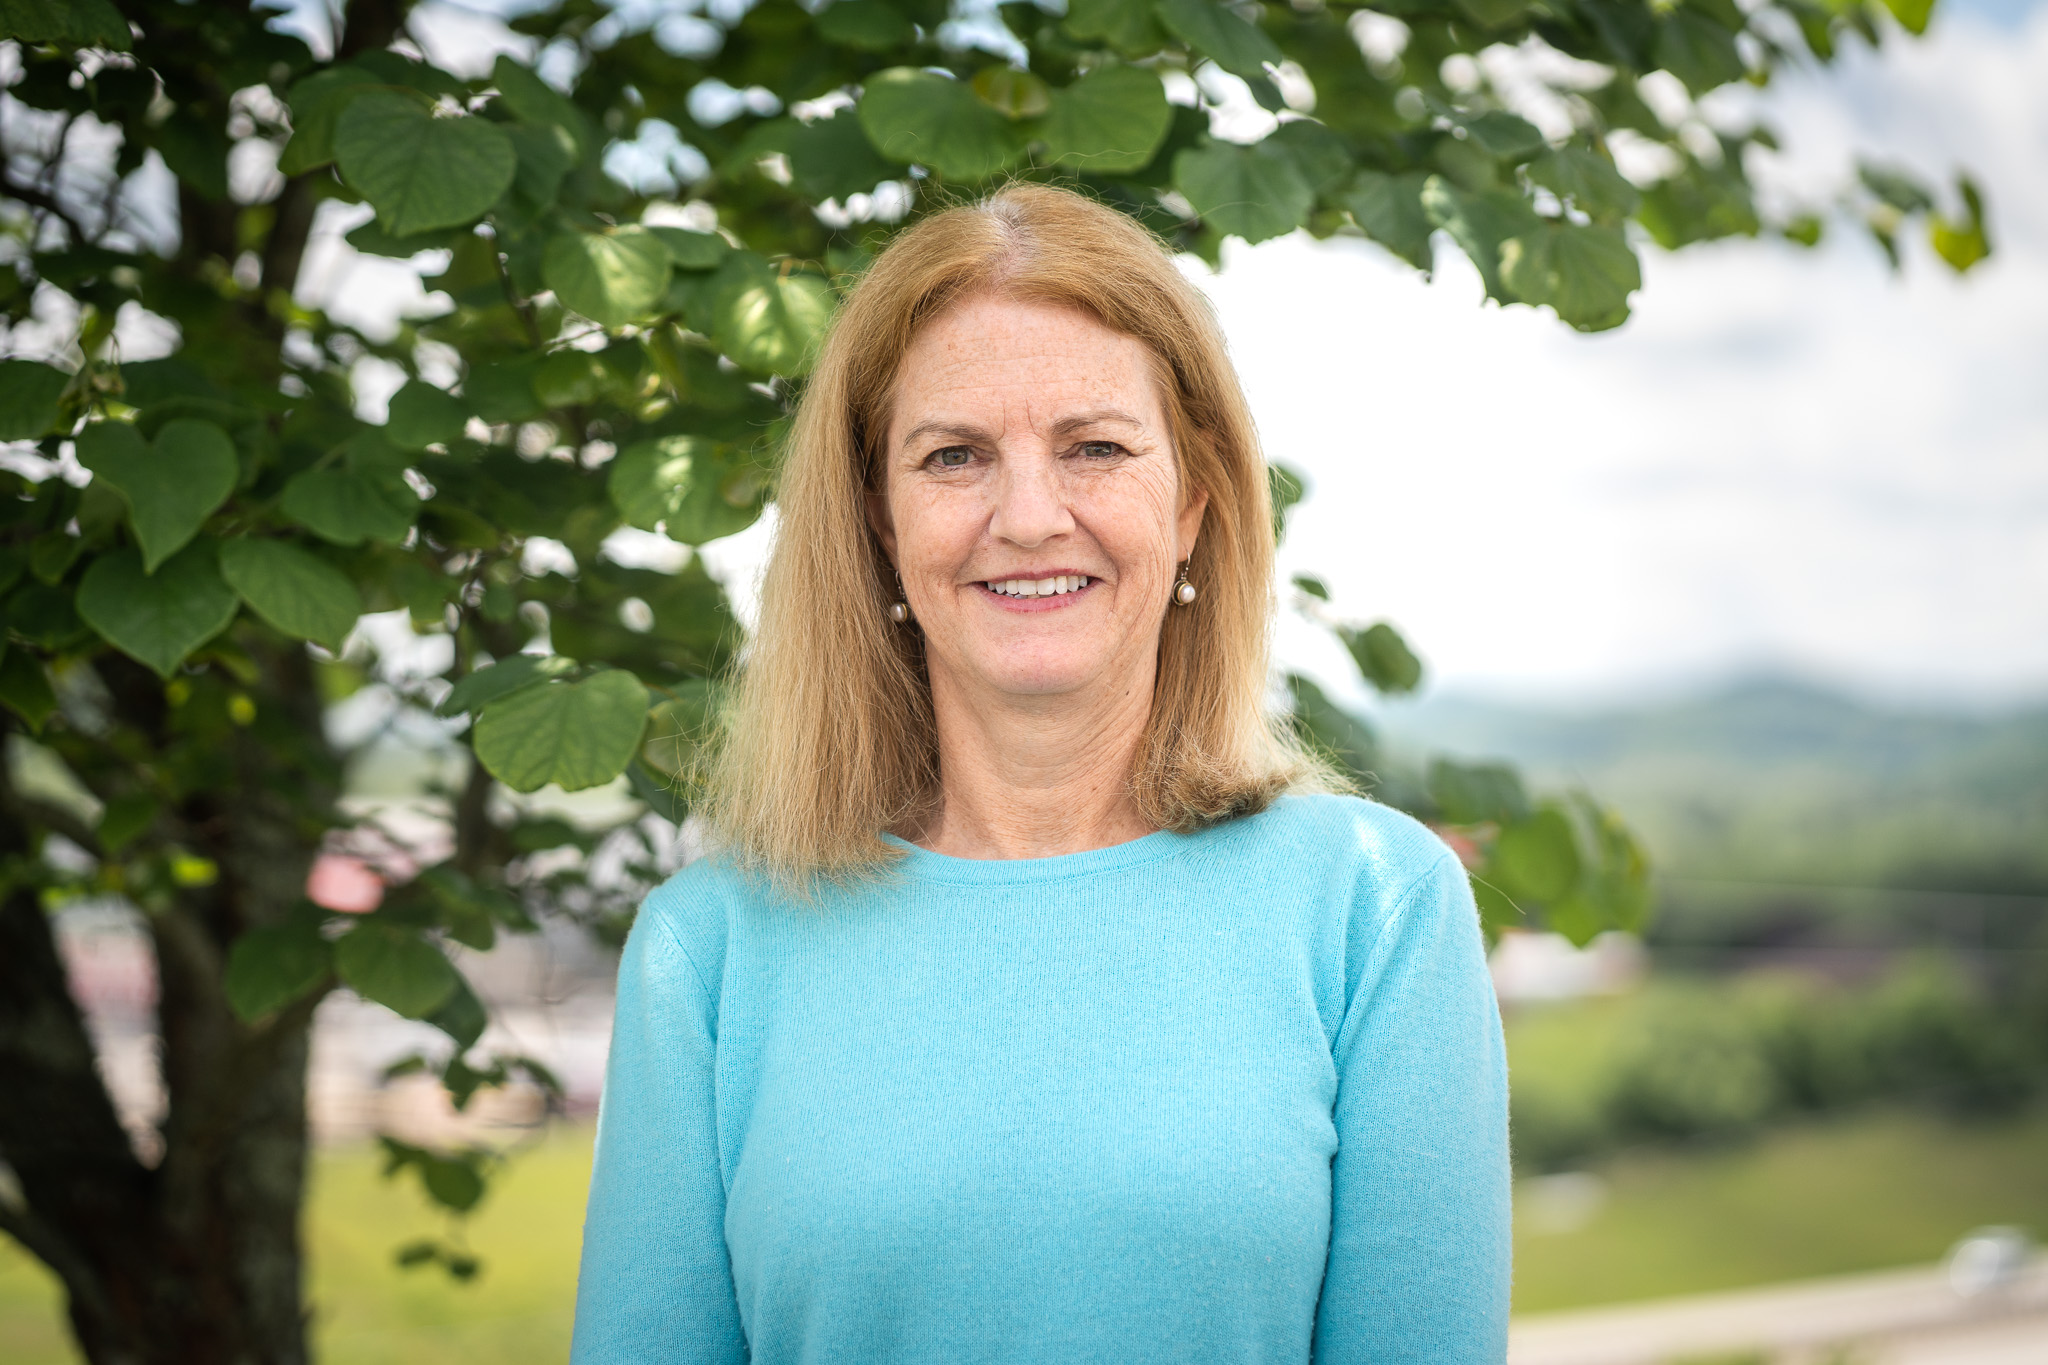 Associate Provost, Nancy Parks, is pictured smiling while wearing a light blue shirt. She stands in front of a tree with mountains in the background.